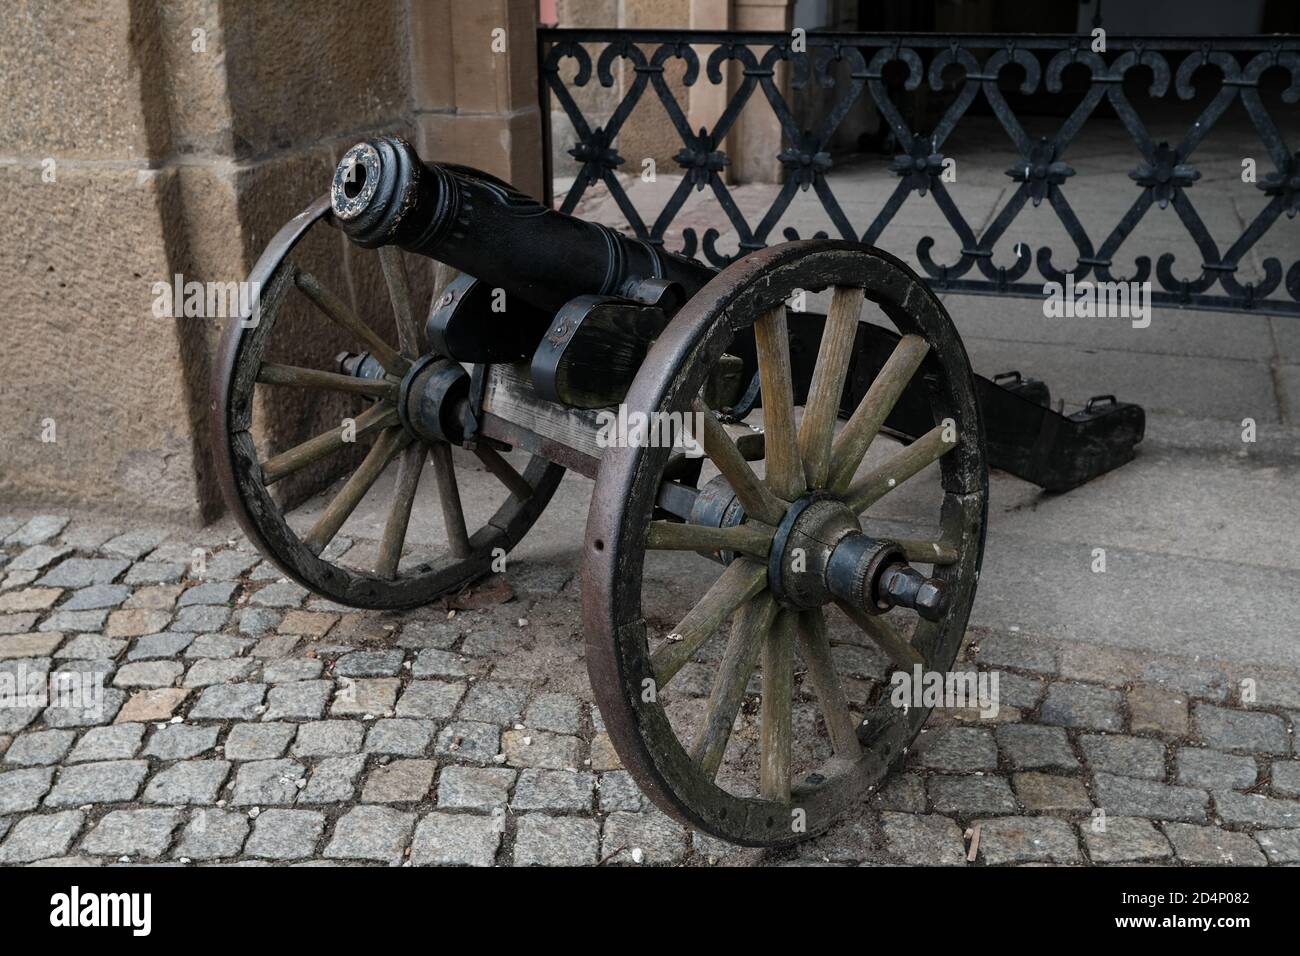 Walbrzych, Poland - 18 July 2020: The cannons at the main entrance, Ksiaz Castle, the largest castle in the Silesia region. Castle Museum Stock Photo